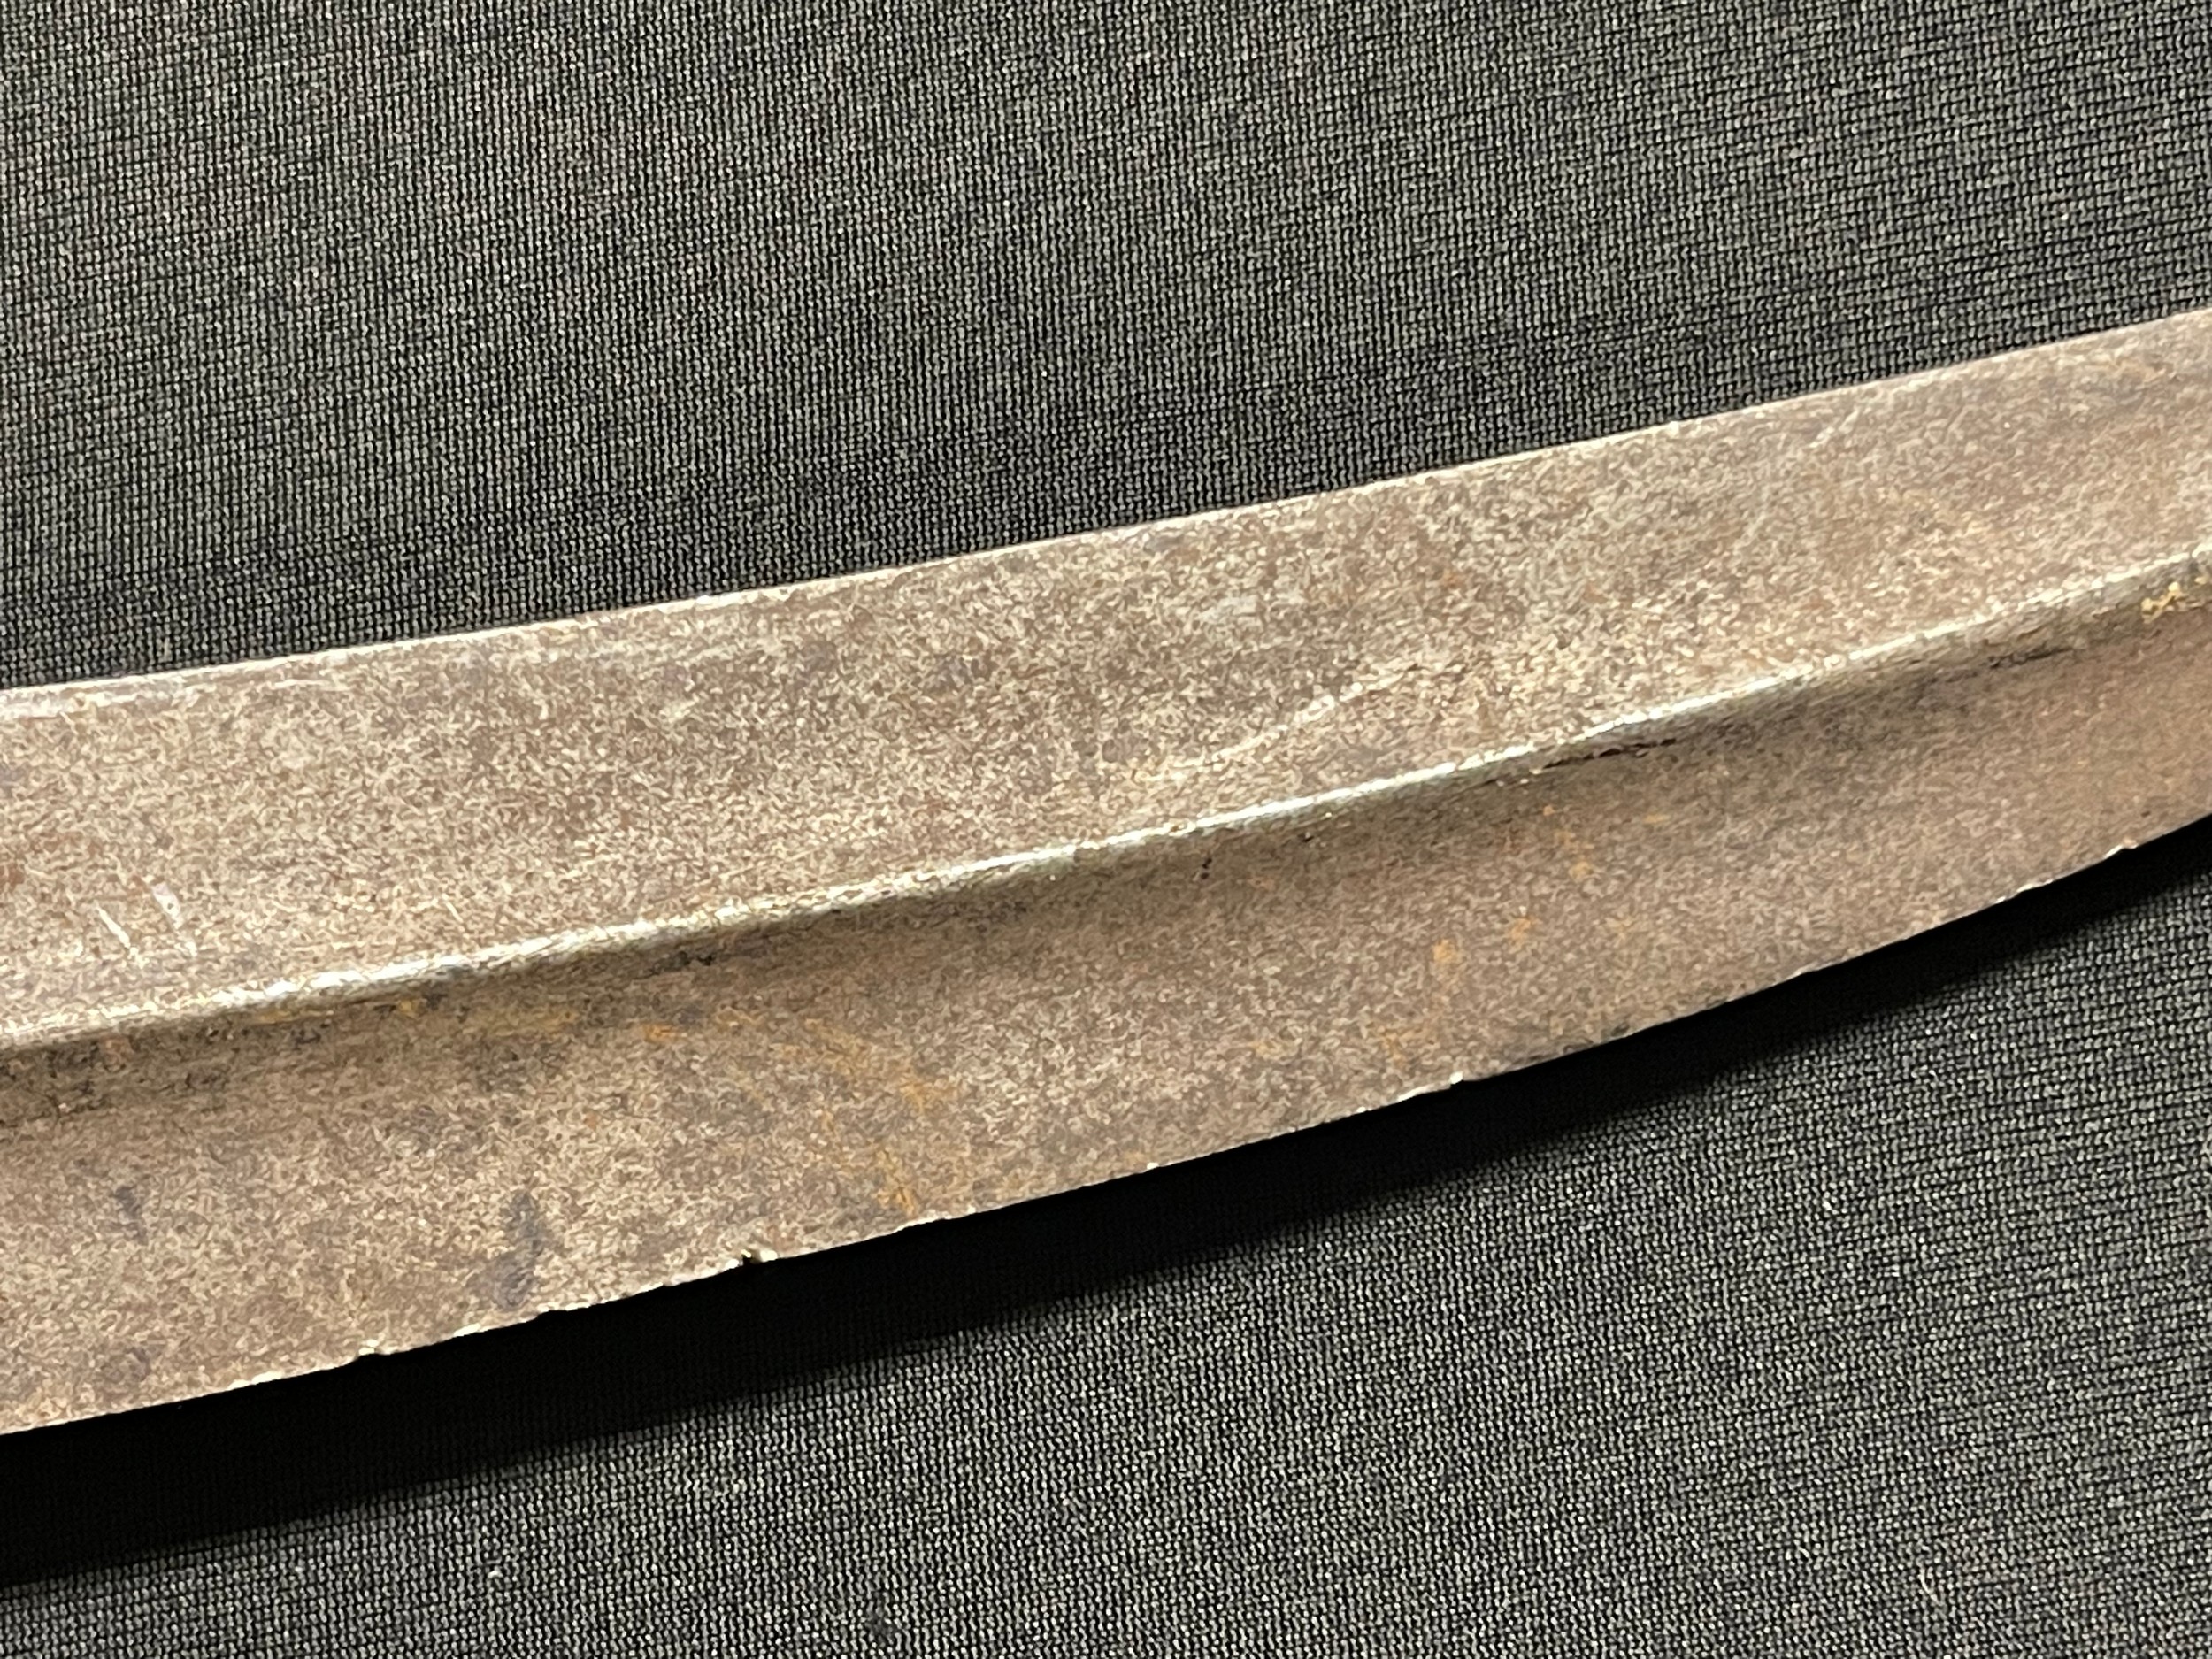 A Middle Eastern kindjal dagger, 24cm curved blade with central ridge, horn handle, 39cm long - Image 4 of 17